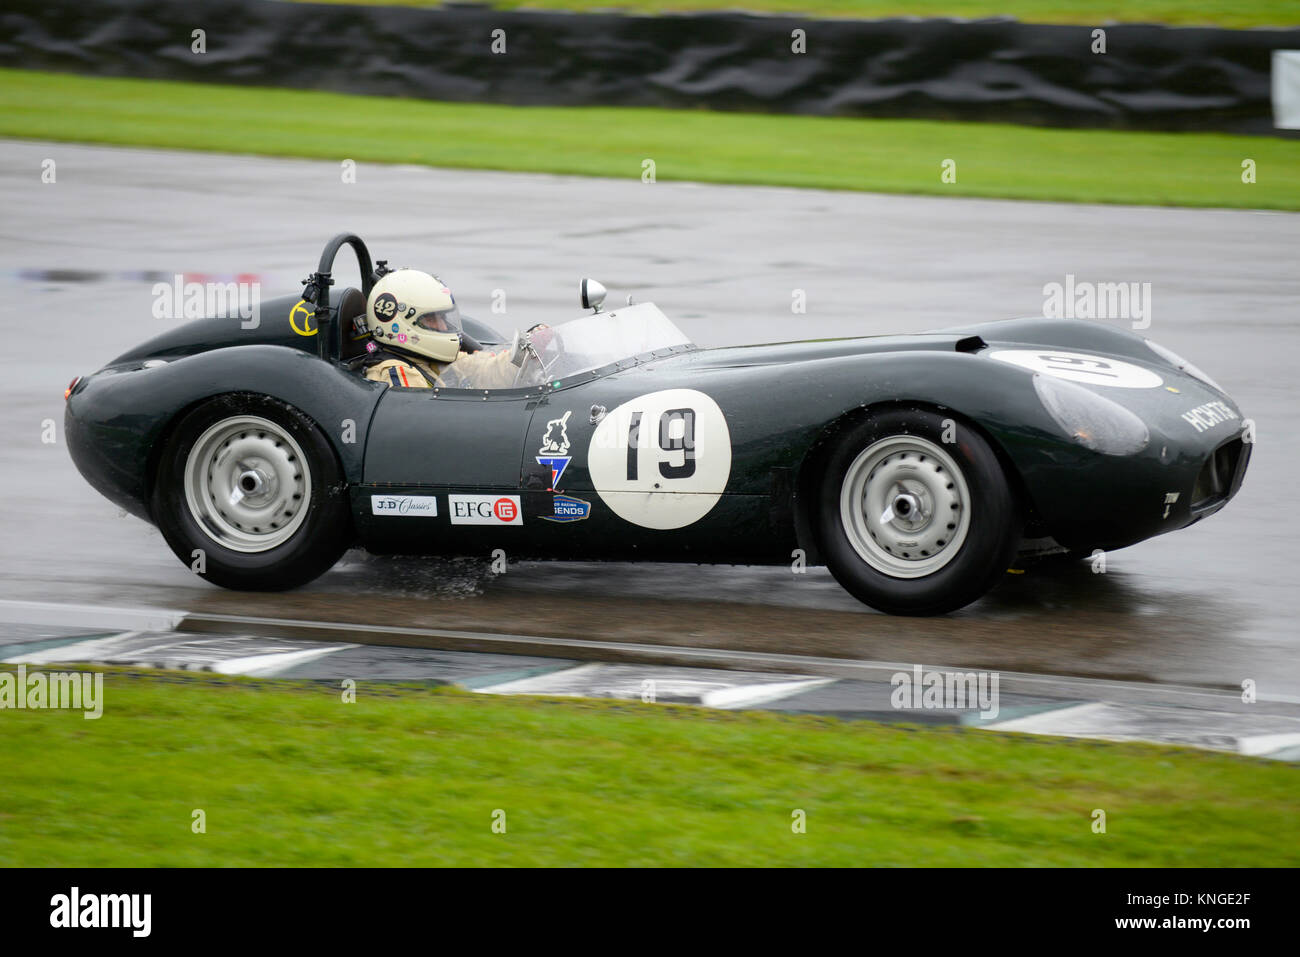 1958 Lister Jaguar Flat Iron owned and driven by Steve Boultbee Brooks racing in the Sussex Trophy at Goodwood Revival 2017 Stock Photo